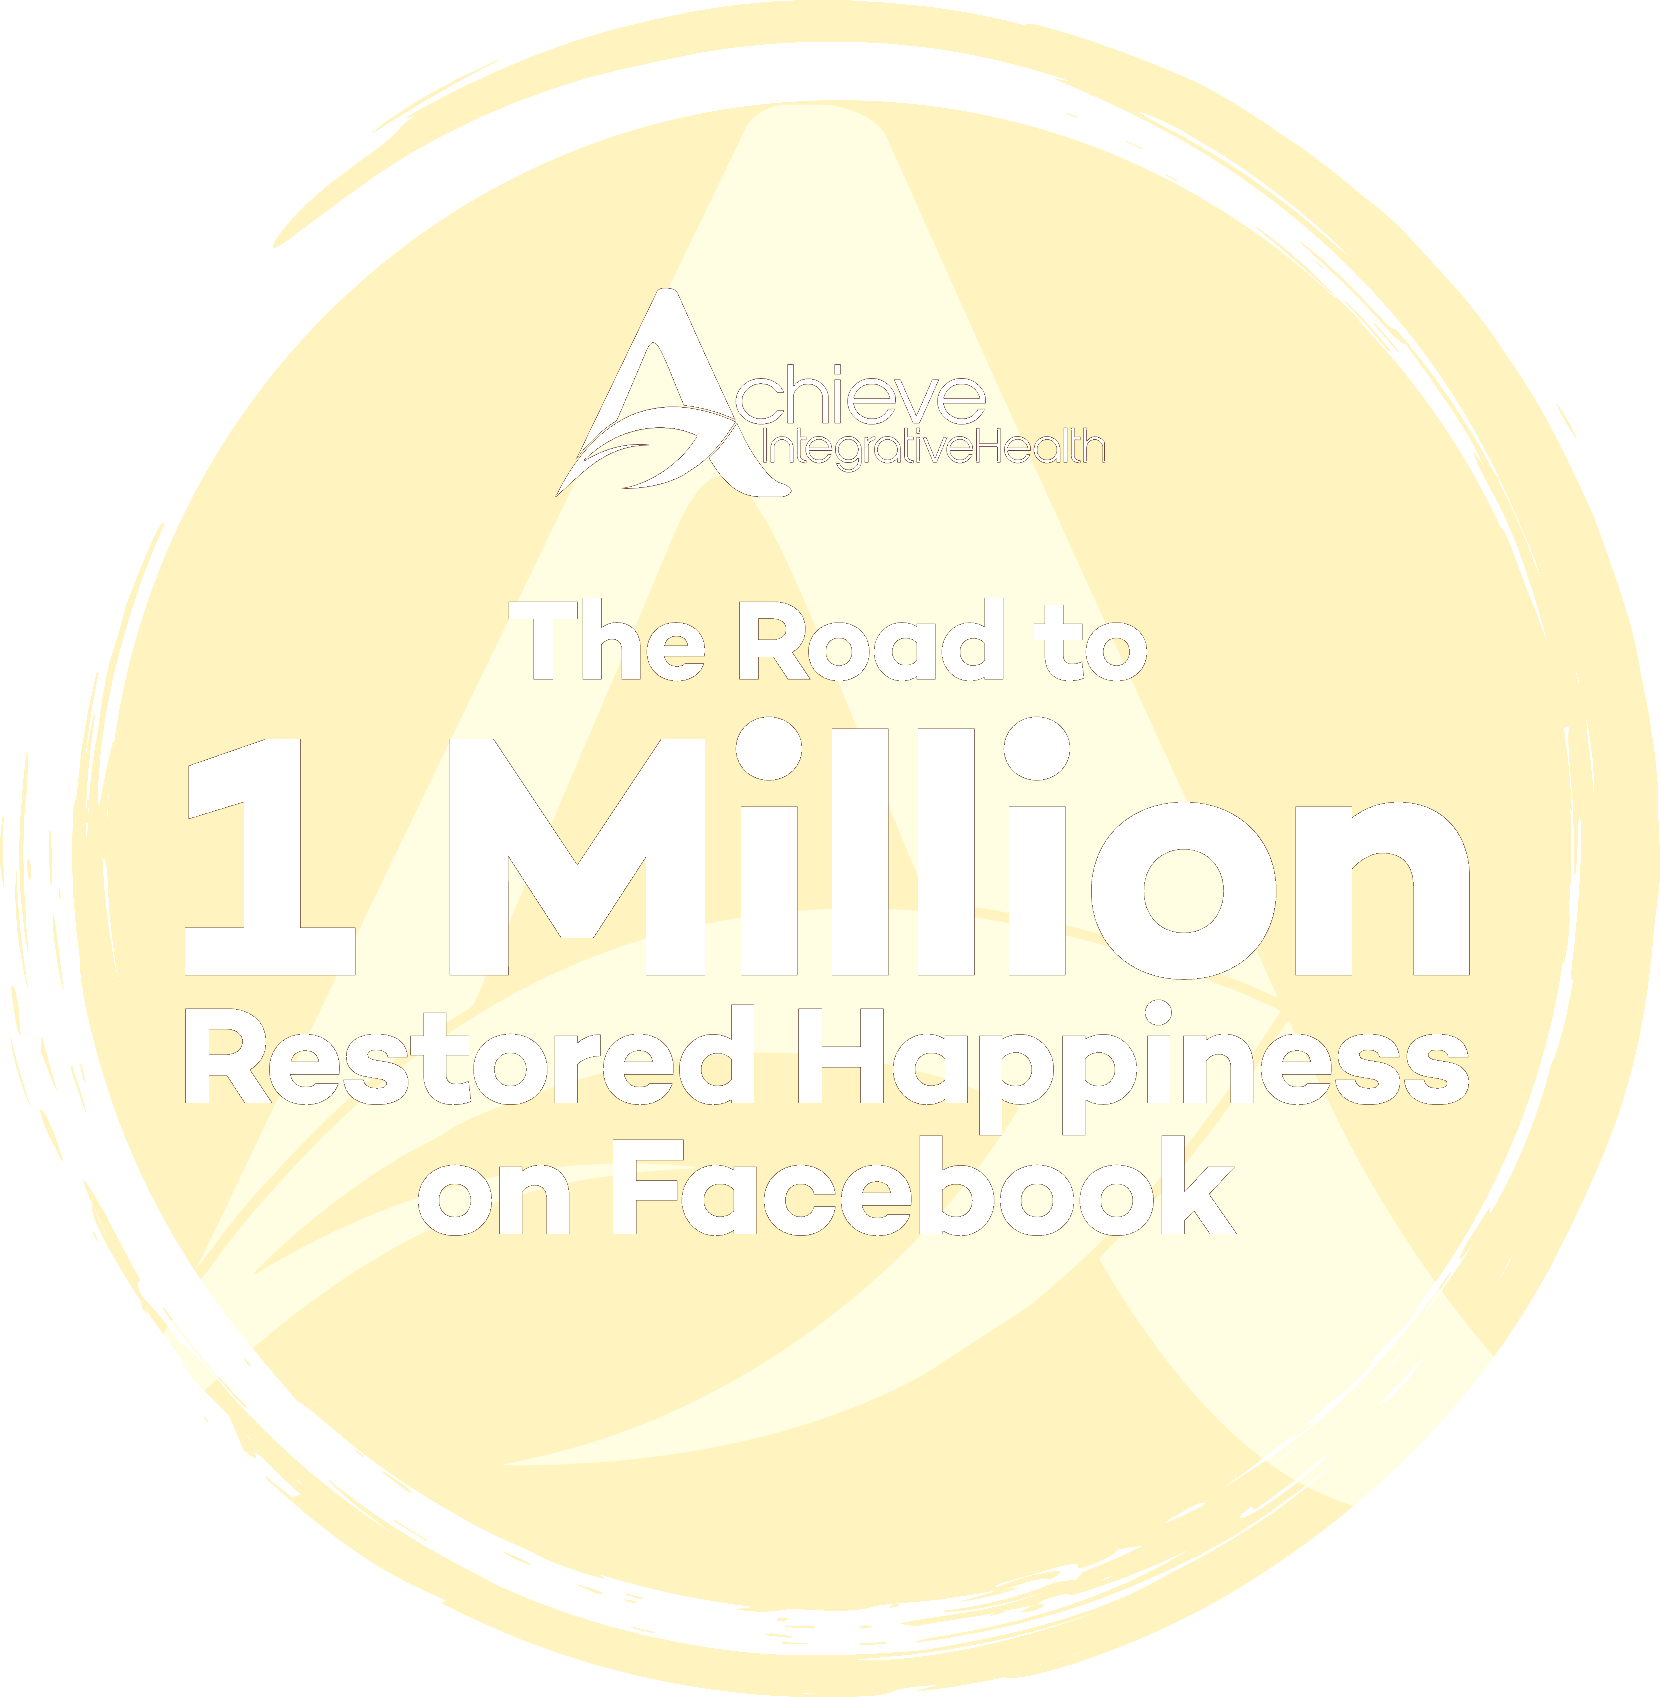 The Road to 1 Million Restored Happiness on Facebook